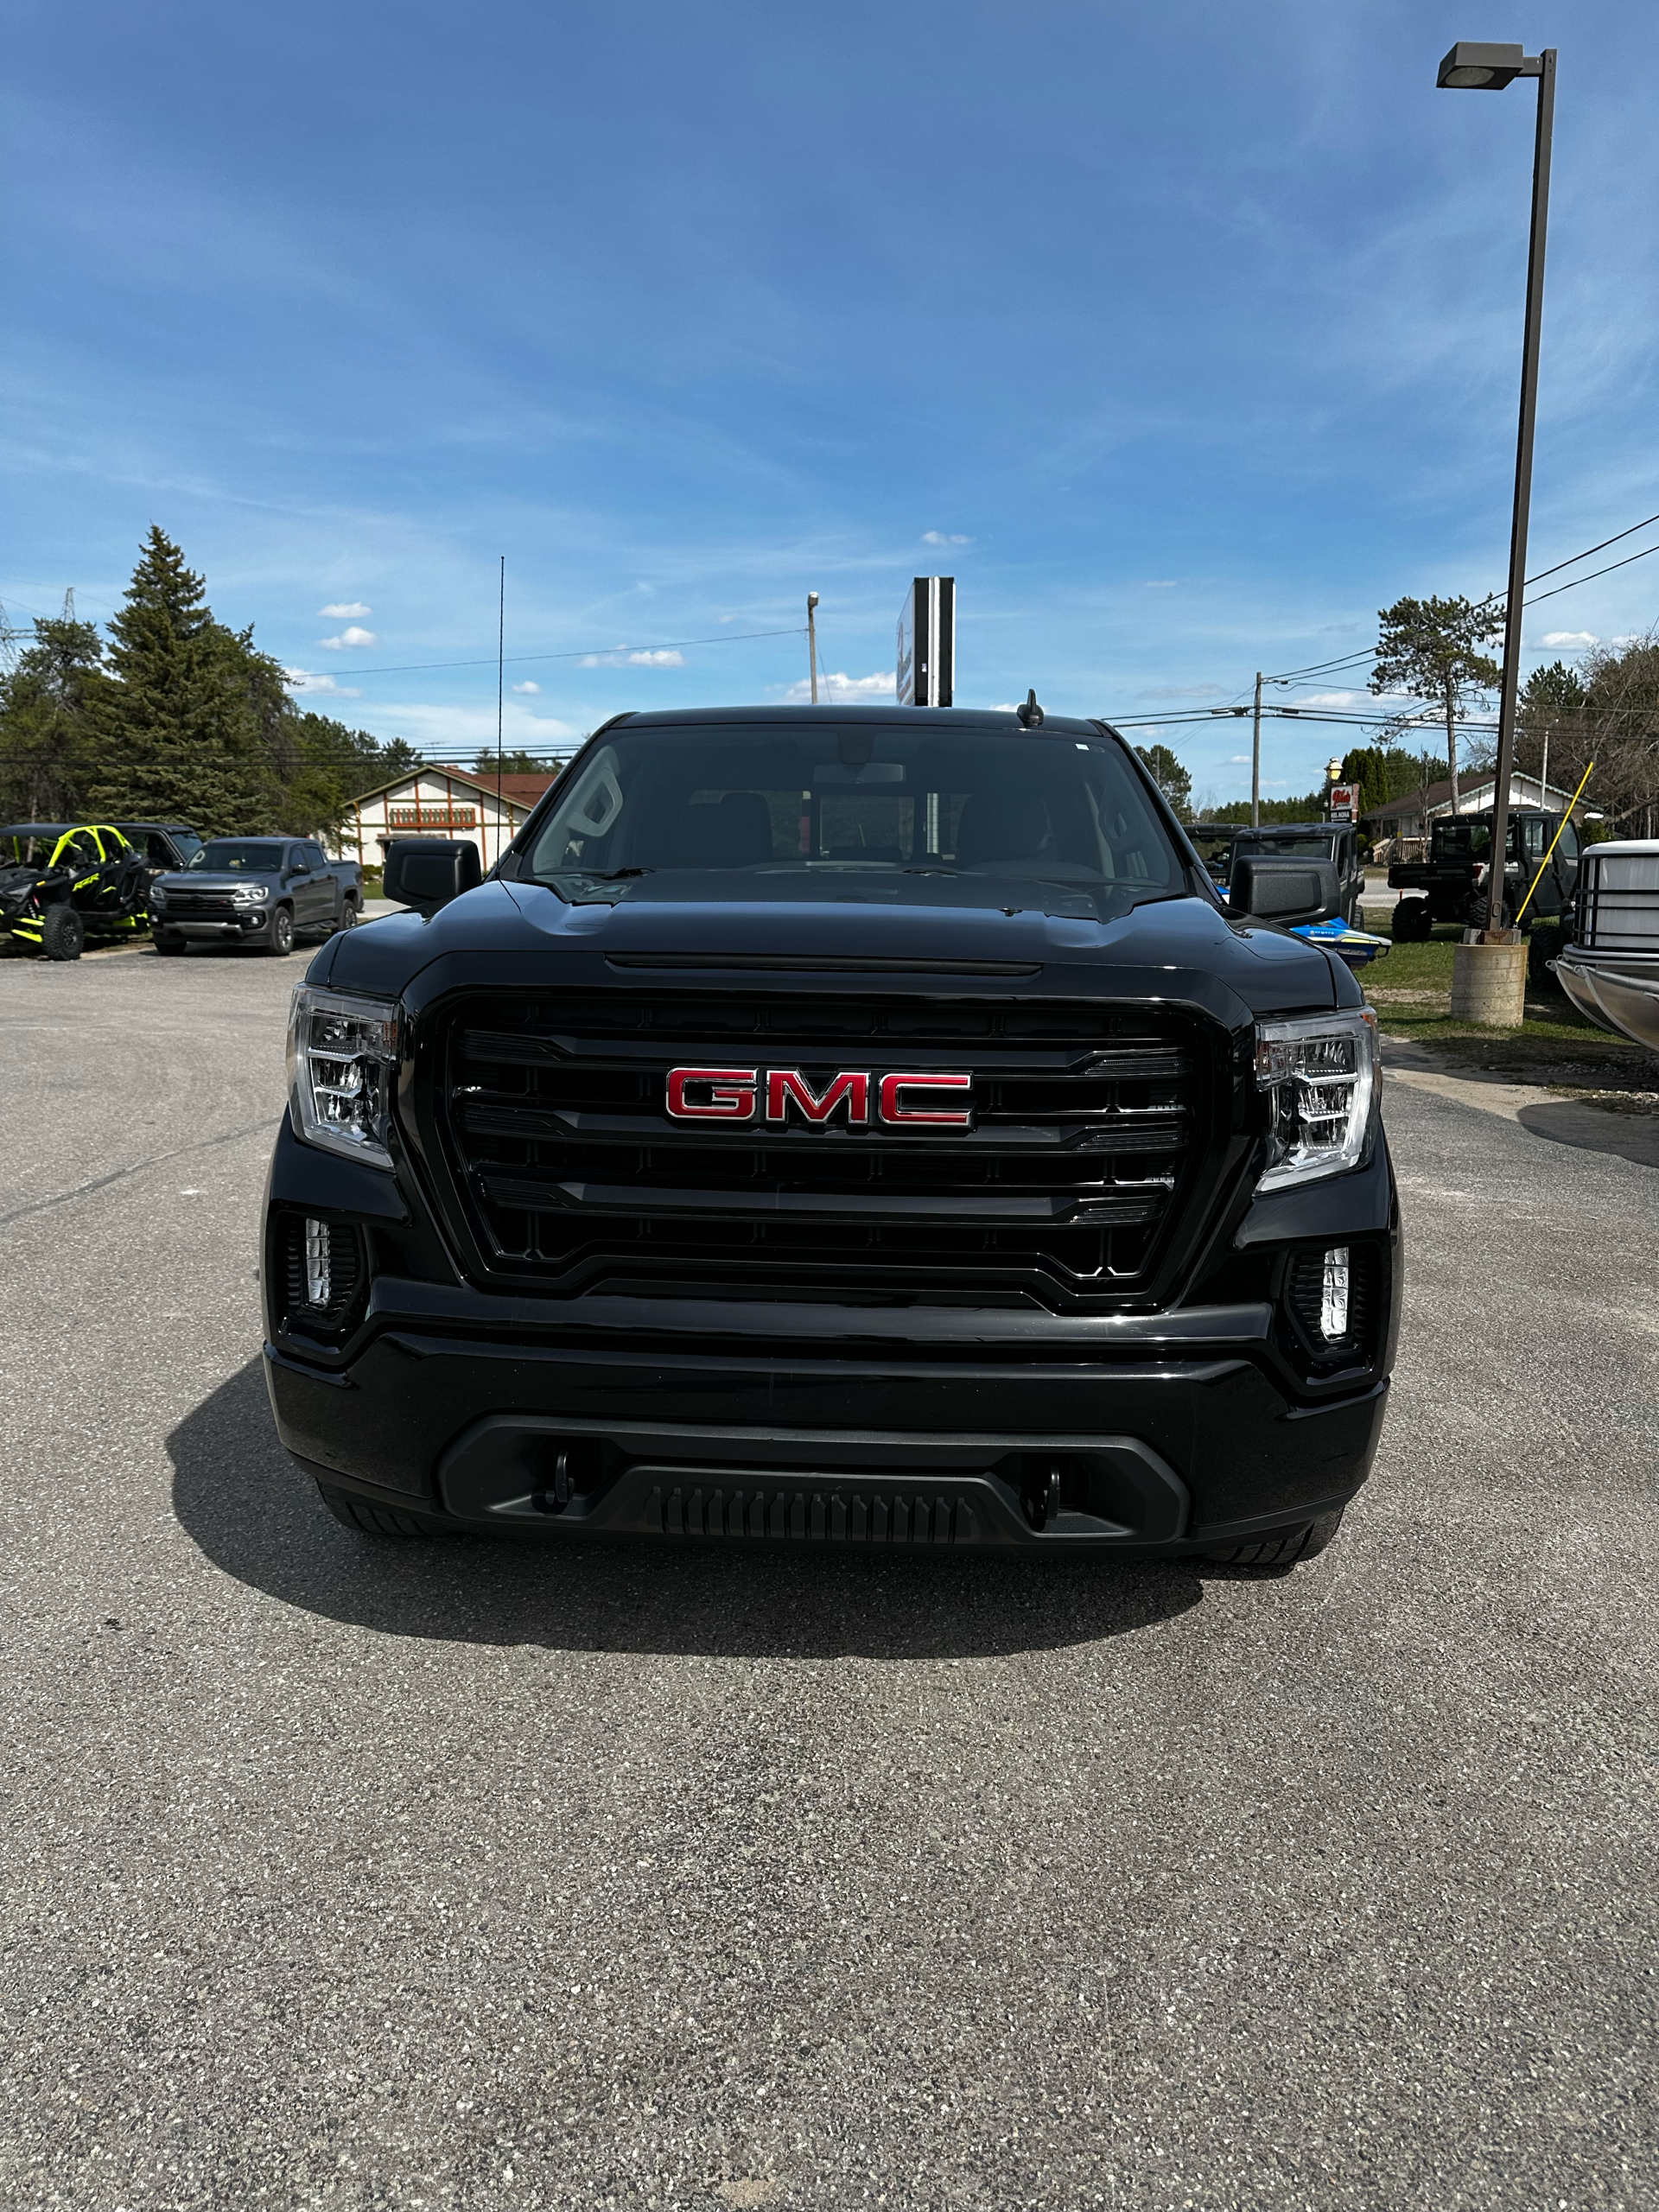 2020 Other SIERRA 1500 ELEVATION DOUBLE CAB in Gaylord, Michigan - Photo 2